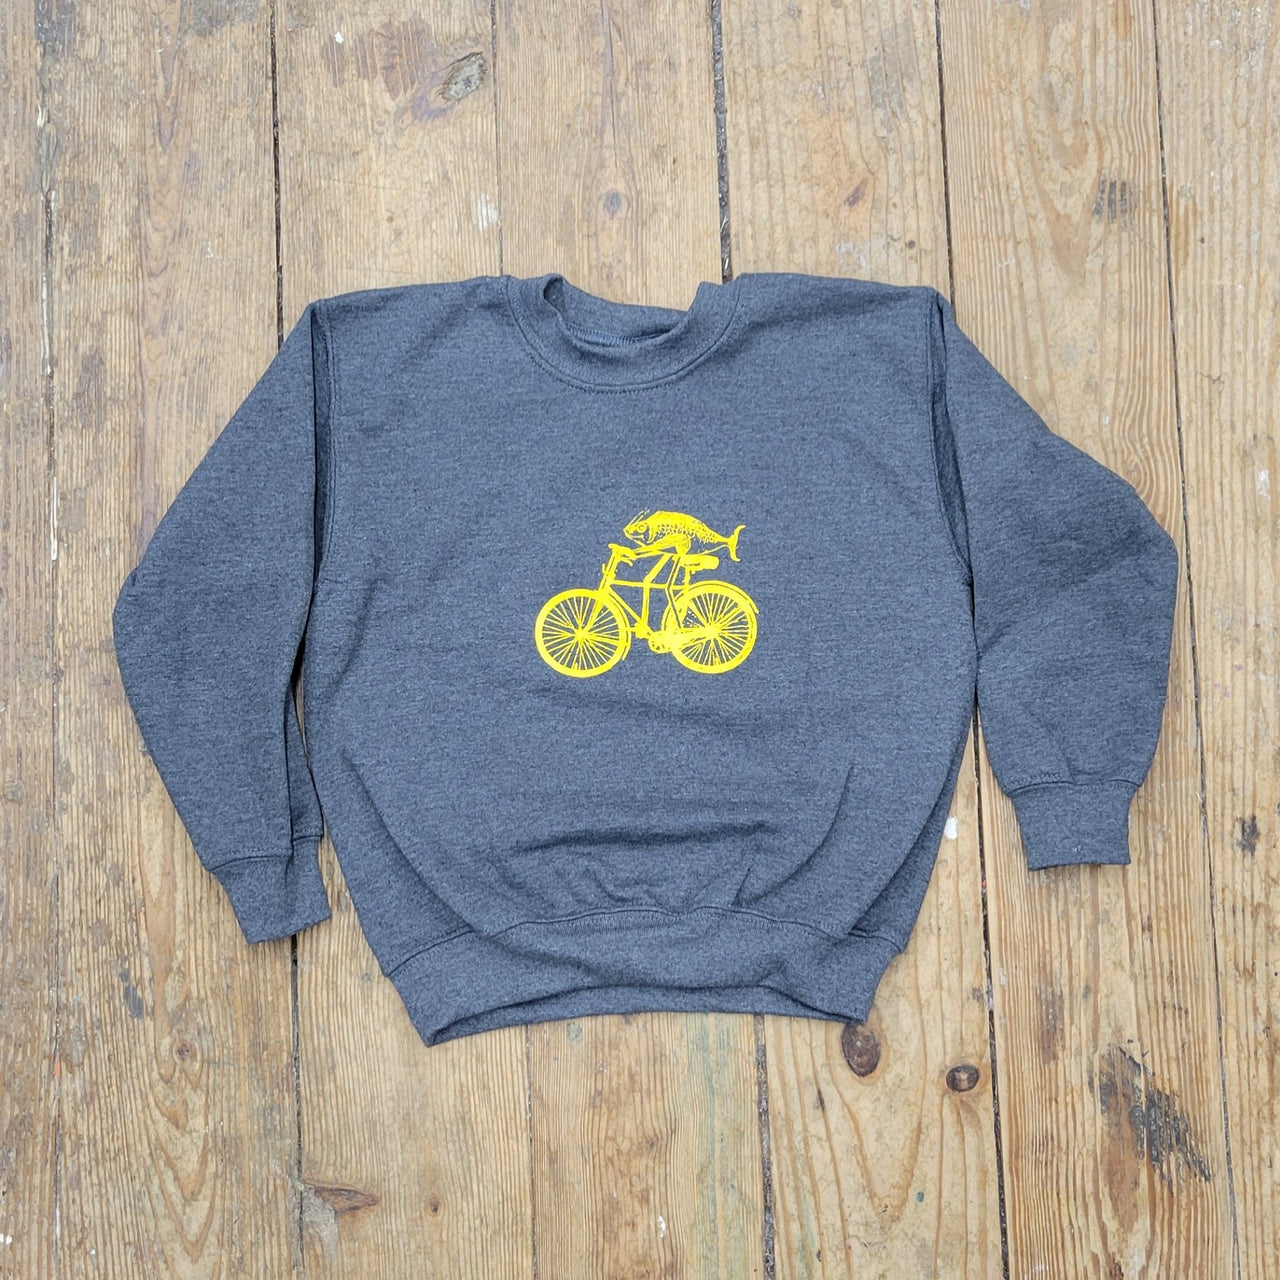 A dark grey sweatshirt with a yellow 'Fish on a Bike' design on the front.